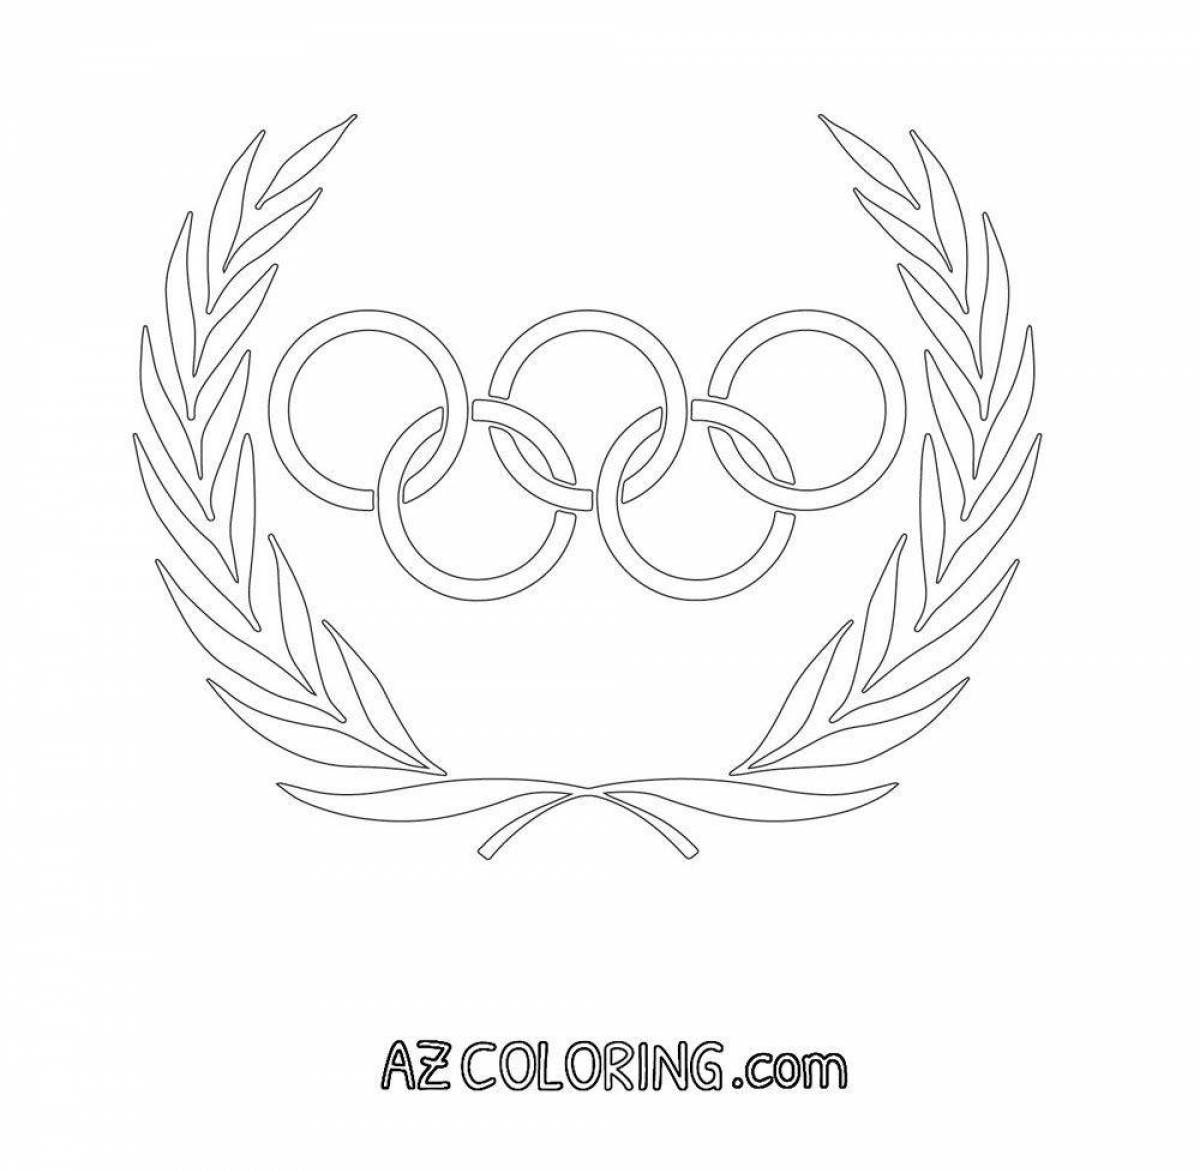 Adorable olympic rings coloring page